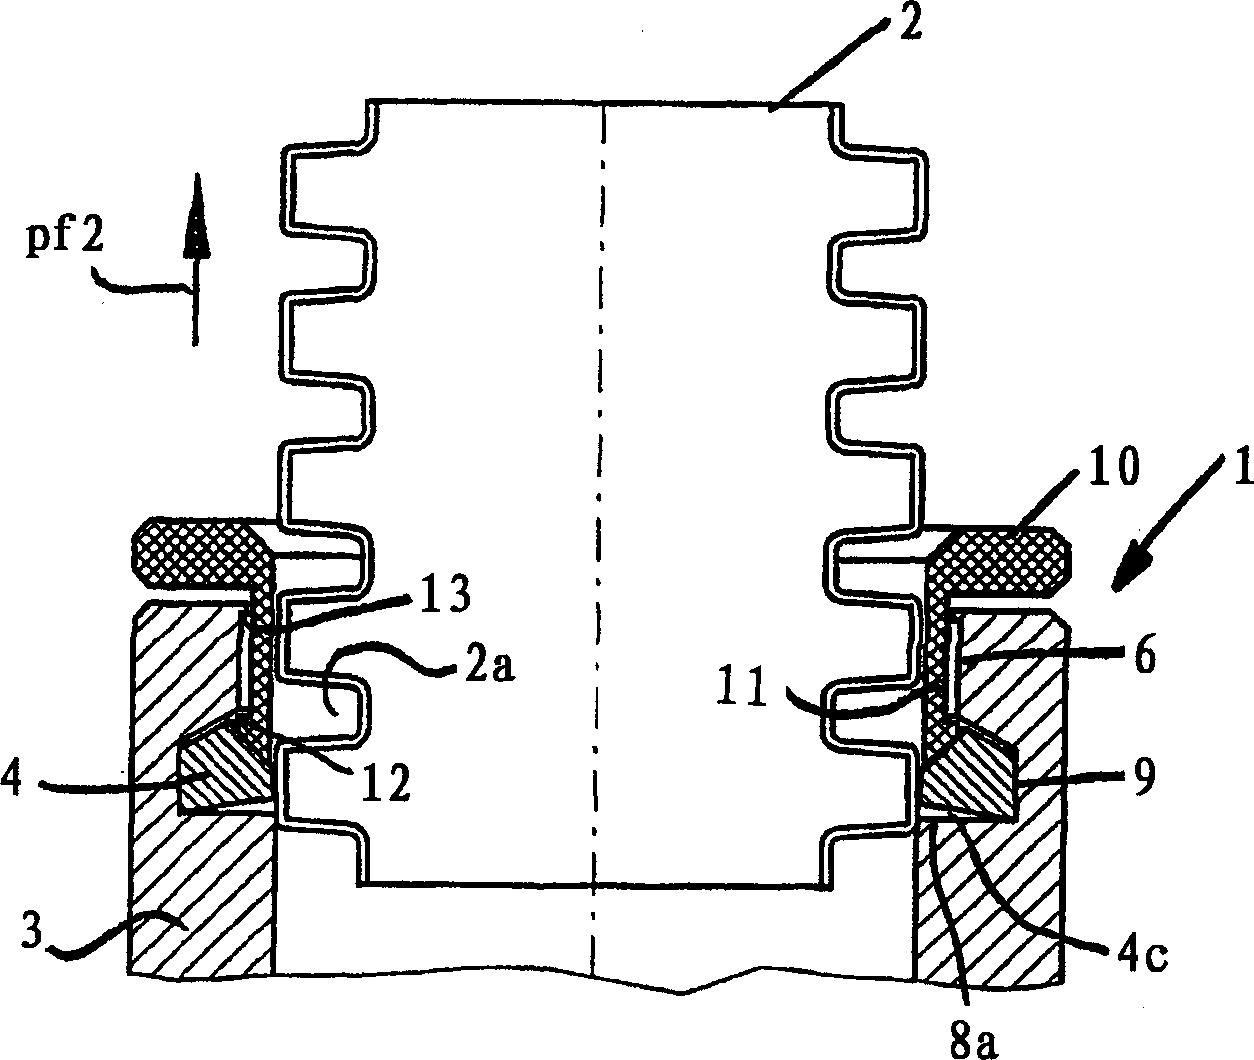 Connecting fitting for peripherally ribbed longitudinal bodies with locking retaining projecting element